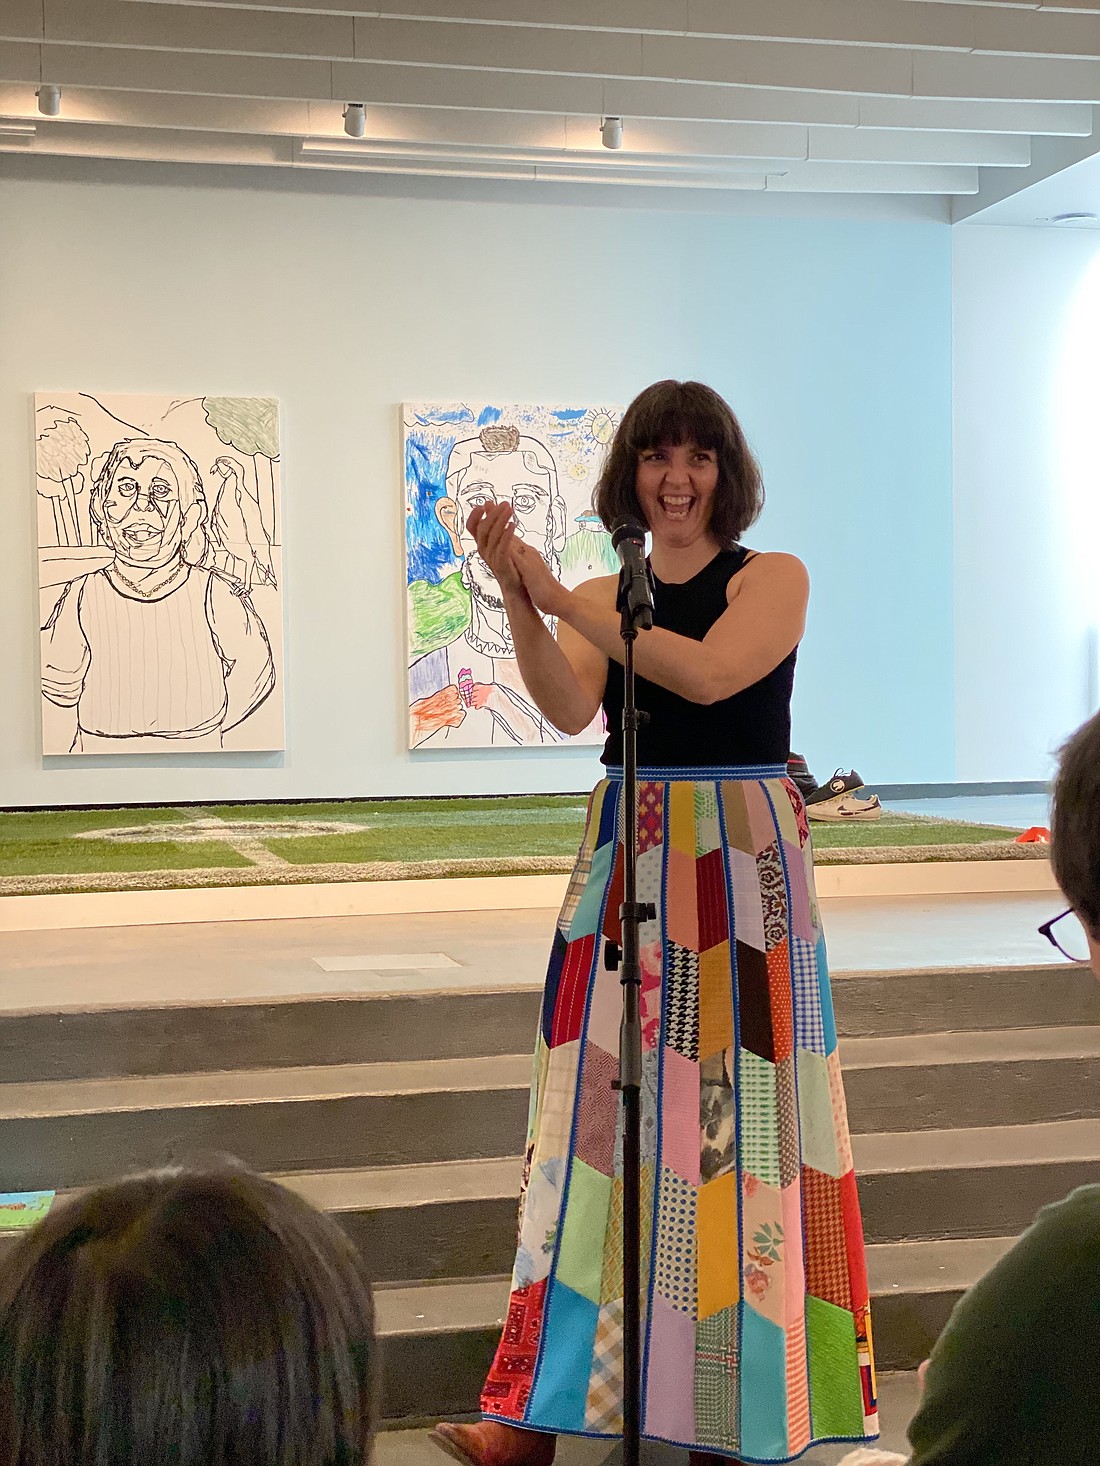 Storyteller Rachael Harrington will be featured at the White Plains Public Library Fri. and Sat., Apr. 12 & 13. See Nearby In-Person Events below for details.